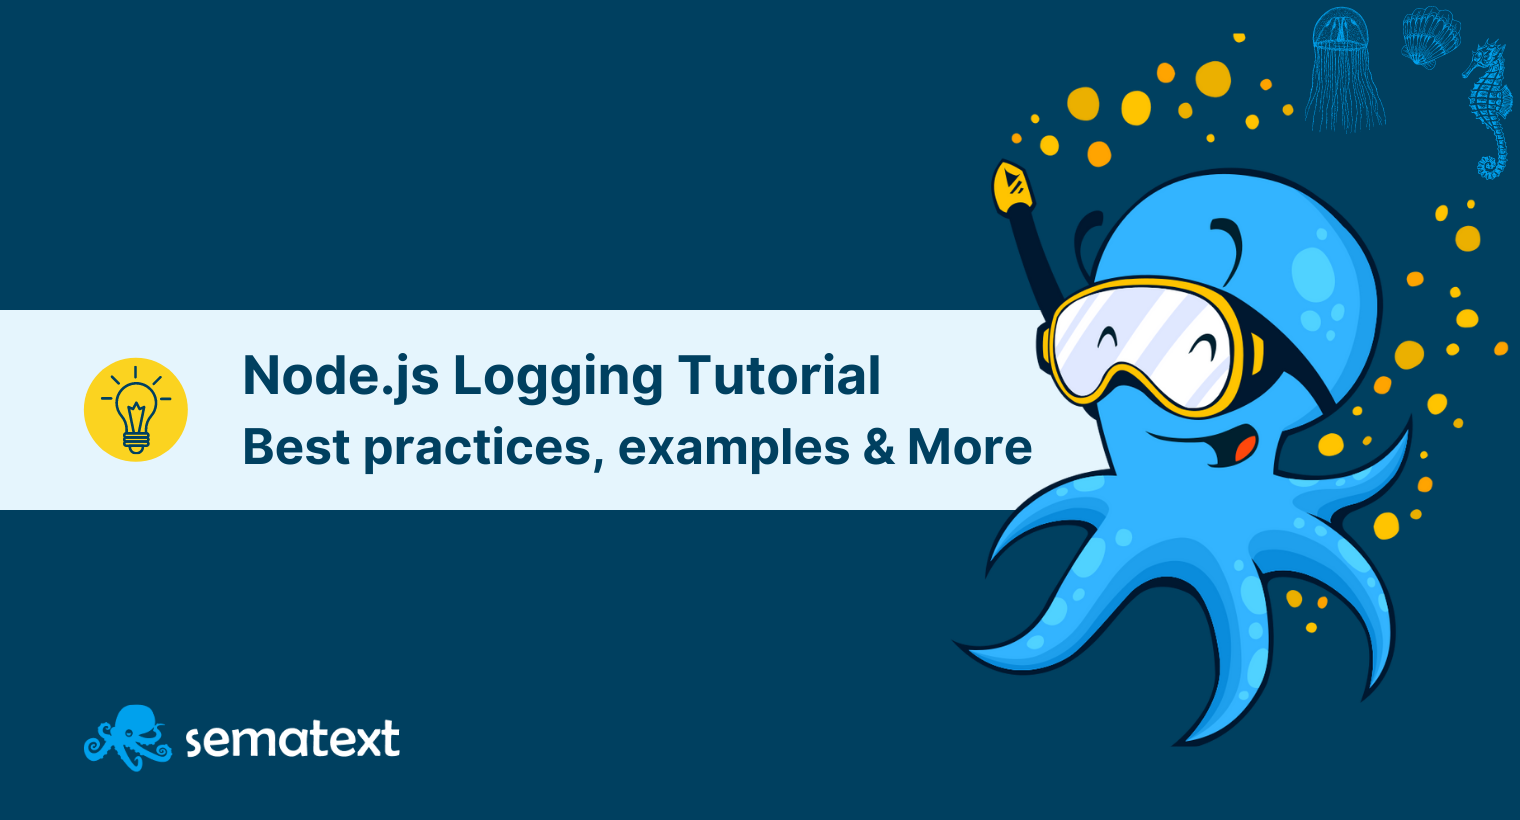 Node.js Logging Made Easy: A Tutorial on Just About Everything You Need to Know